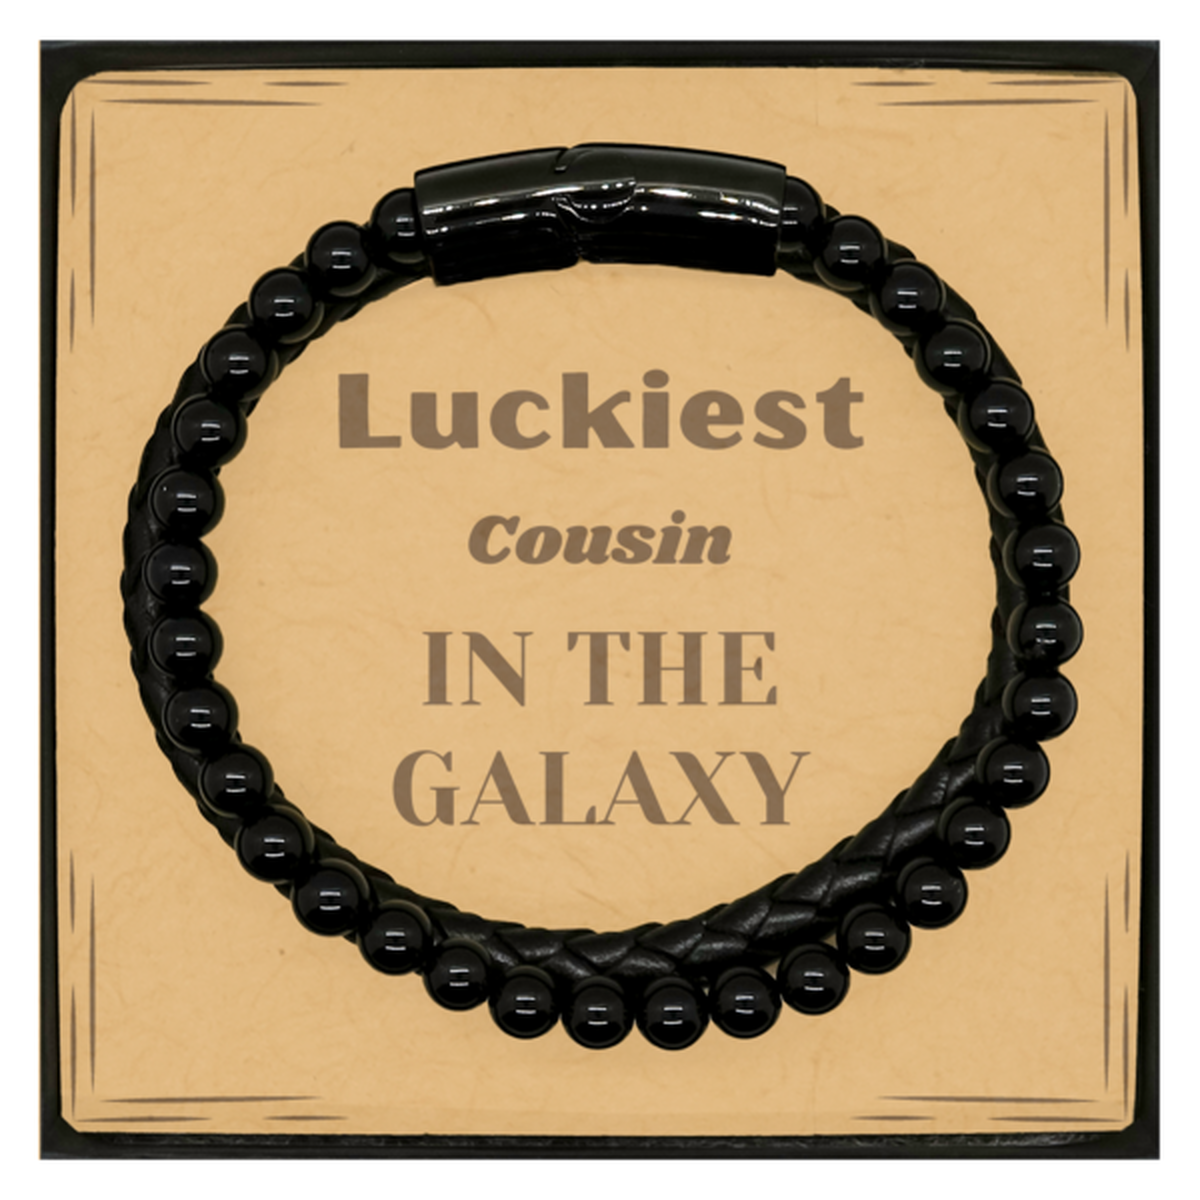 Luckiest Cousin in the Galaxy, To My Cousin Message Card Gifts, Christmas Cousin Stone Leather Bracelets Gifts, X-mas Birthday Unique Gifts For Cousin Men Women